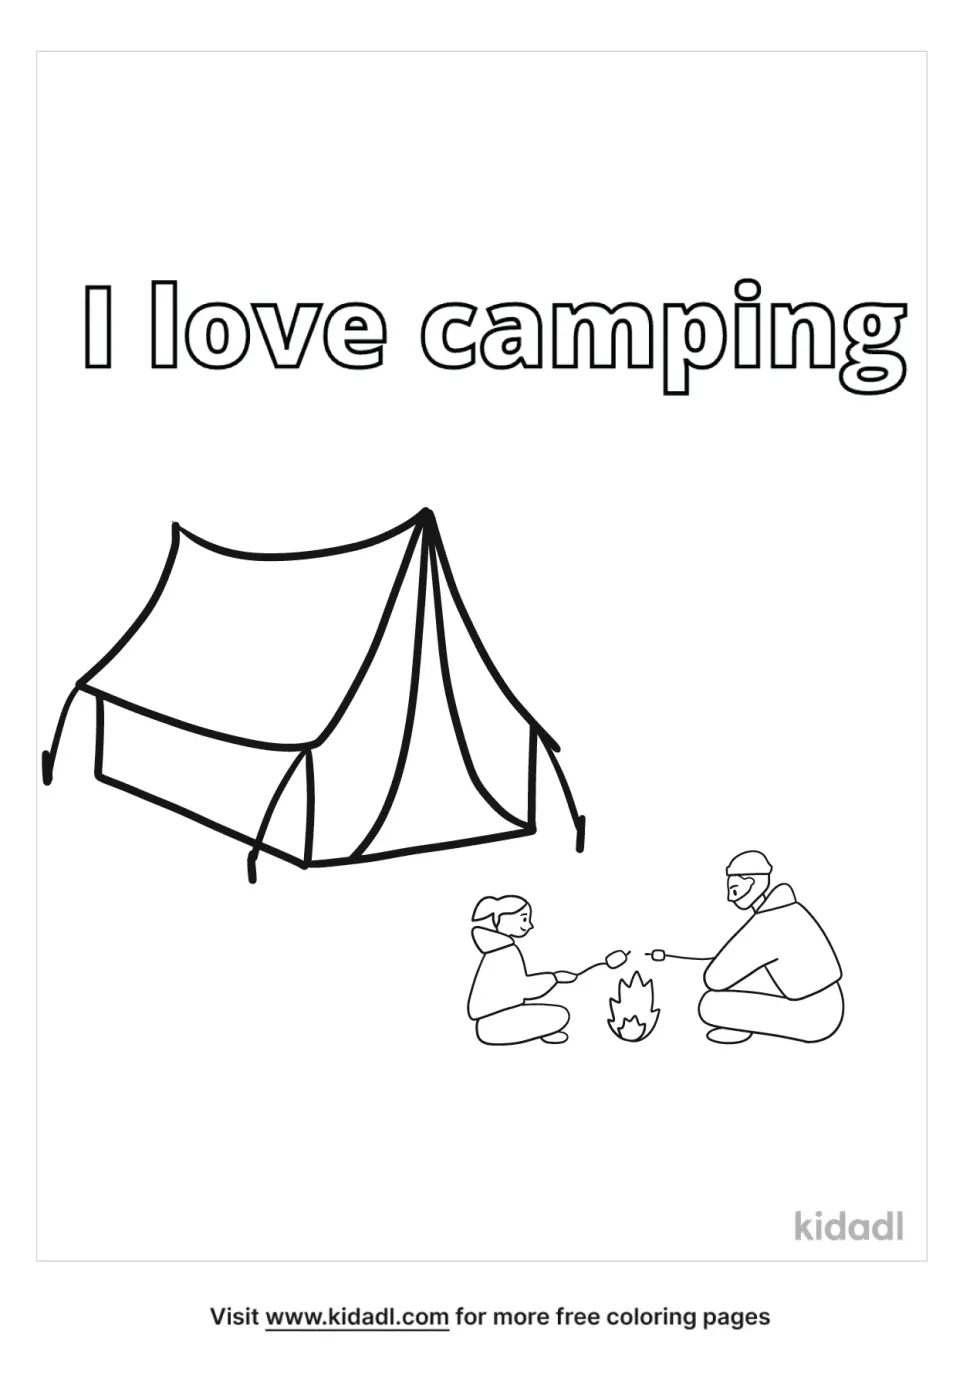 I Love Camping Coloring Page